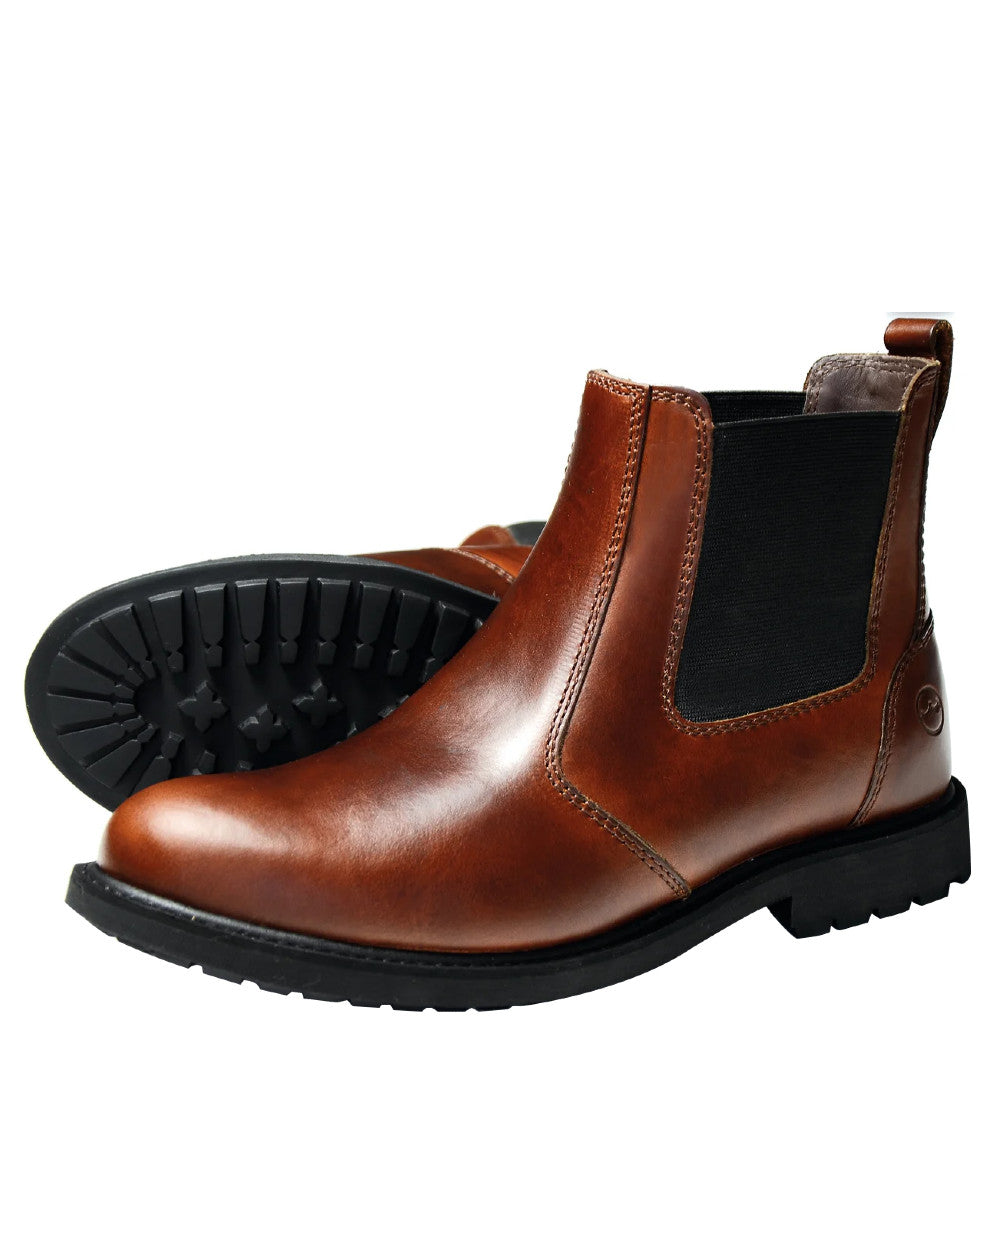 Elk Coloured Orca Bay Mens Brecon Chelsea Boots On A White Background 